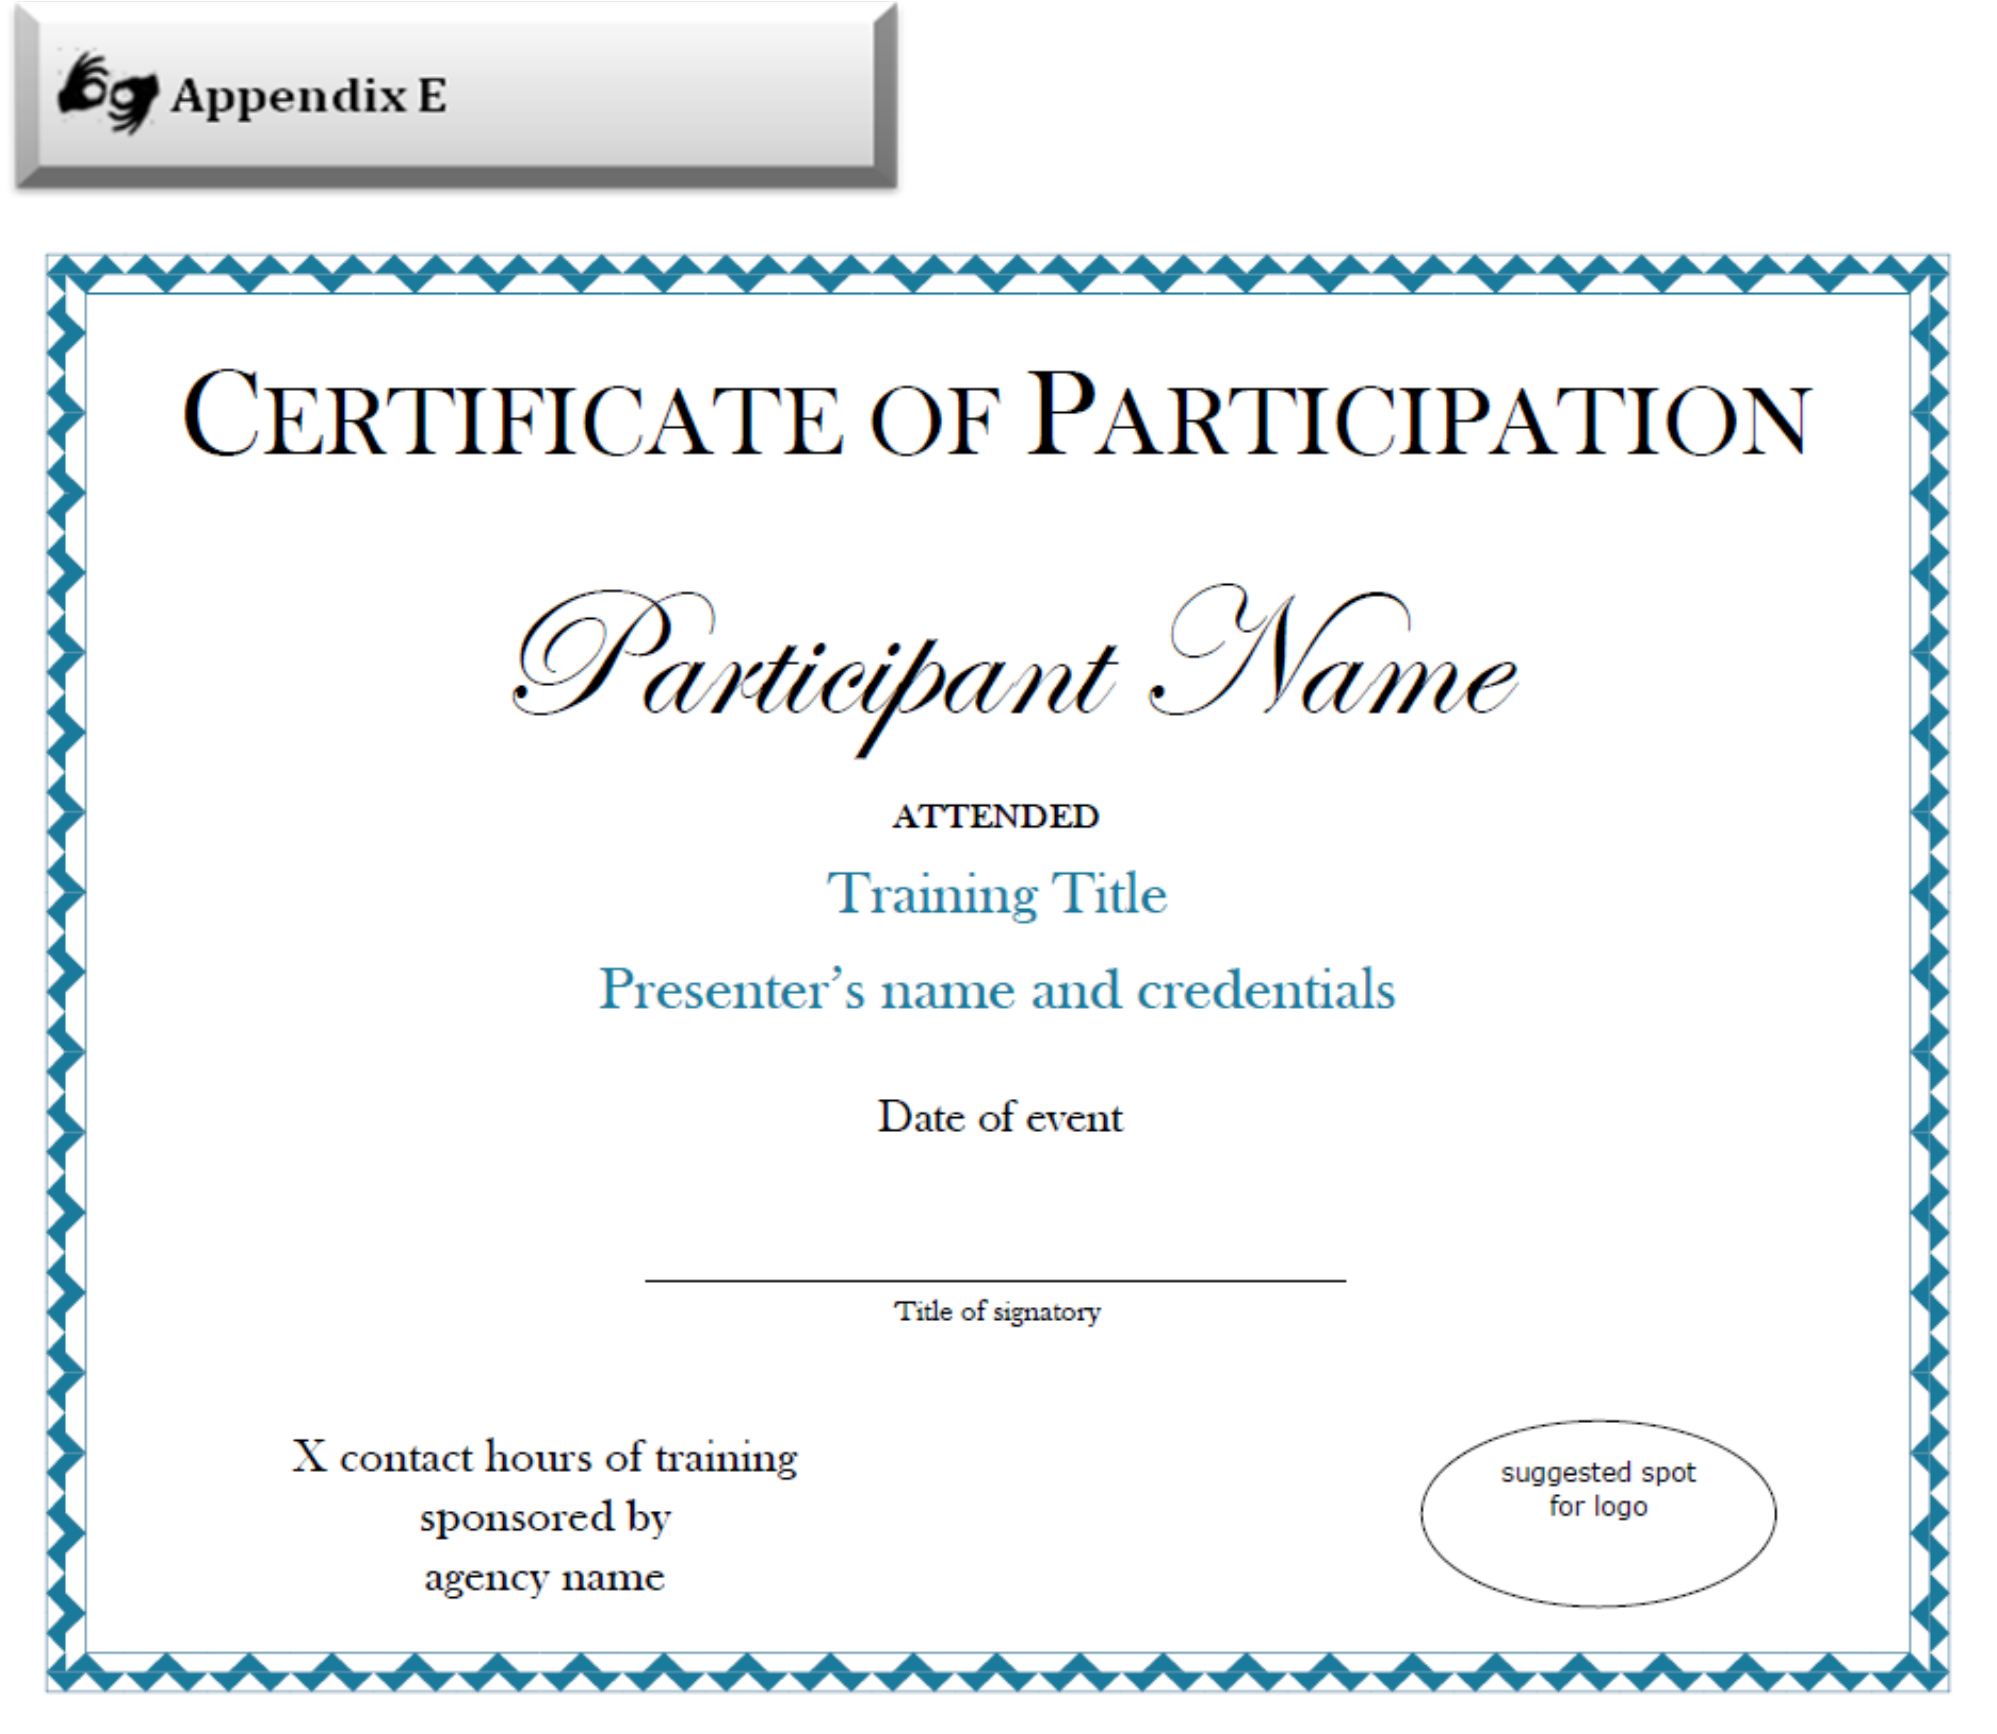 Certificate Of Participation Sample Free Download In Certification Of Participation Free Template